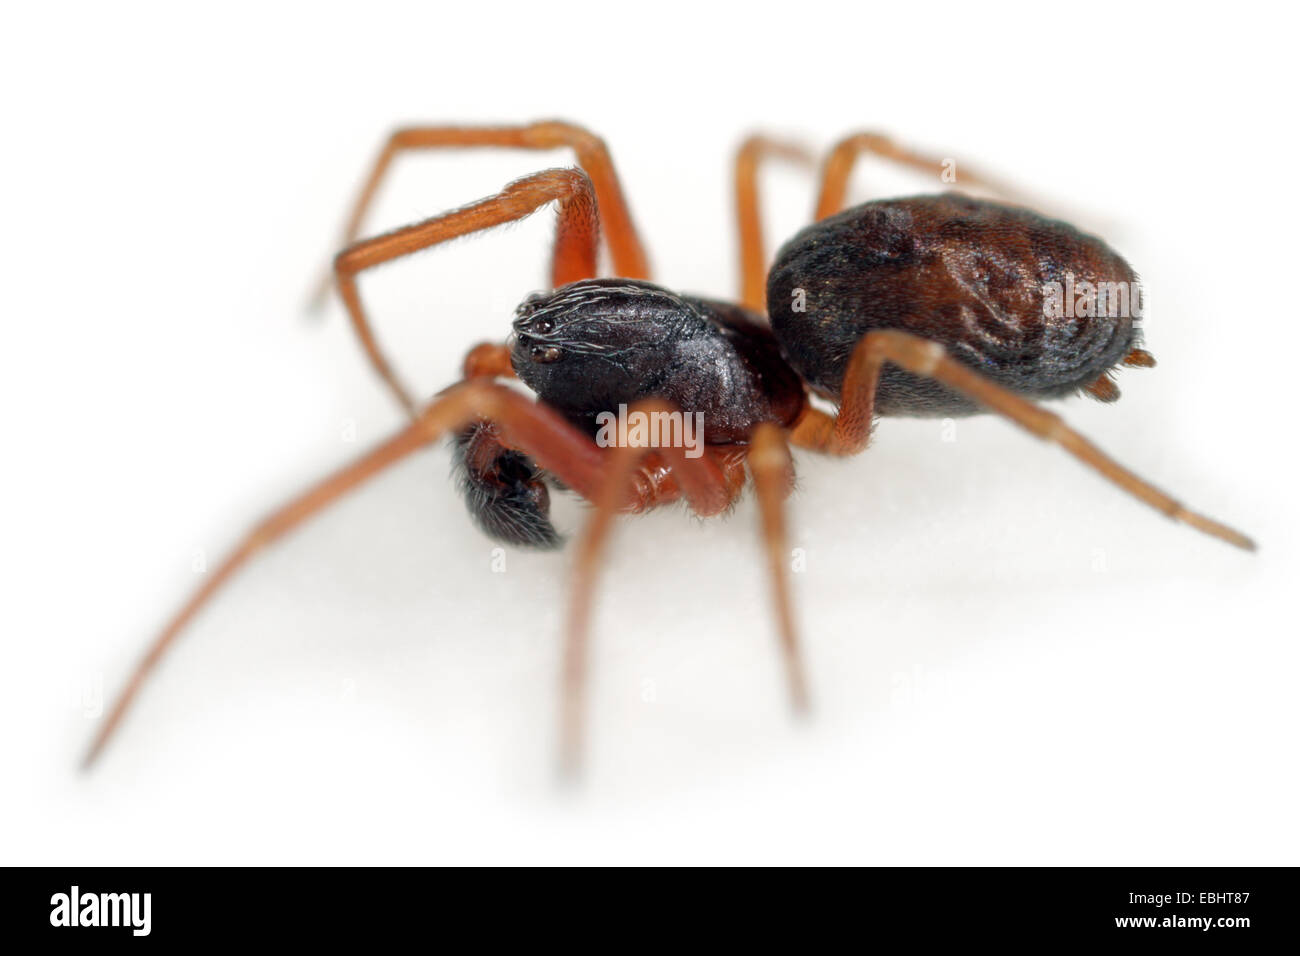 Male Dictyna uncinata spider on white background. Family Dictynidae. Meshweb weavers. Stock Photo